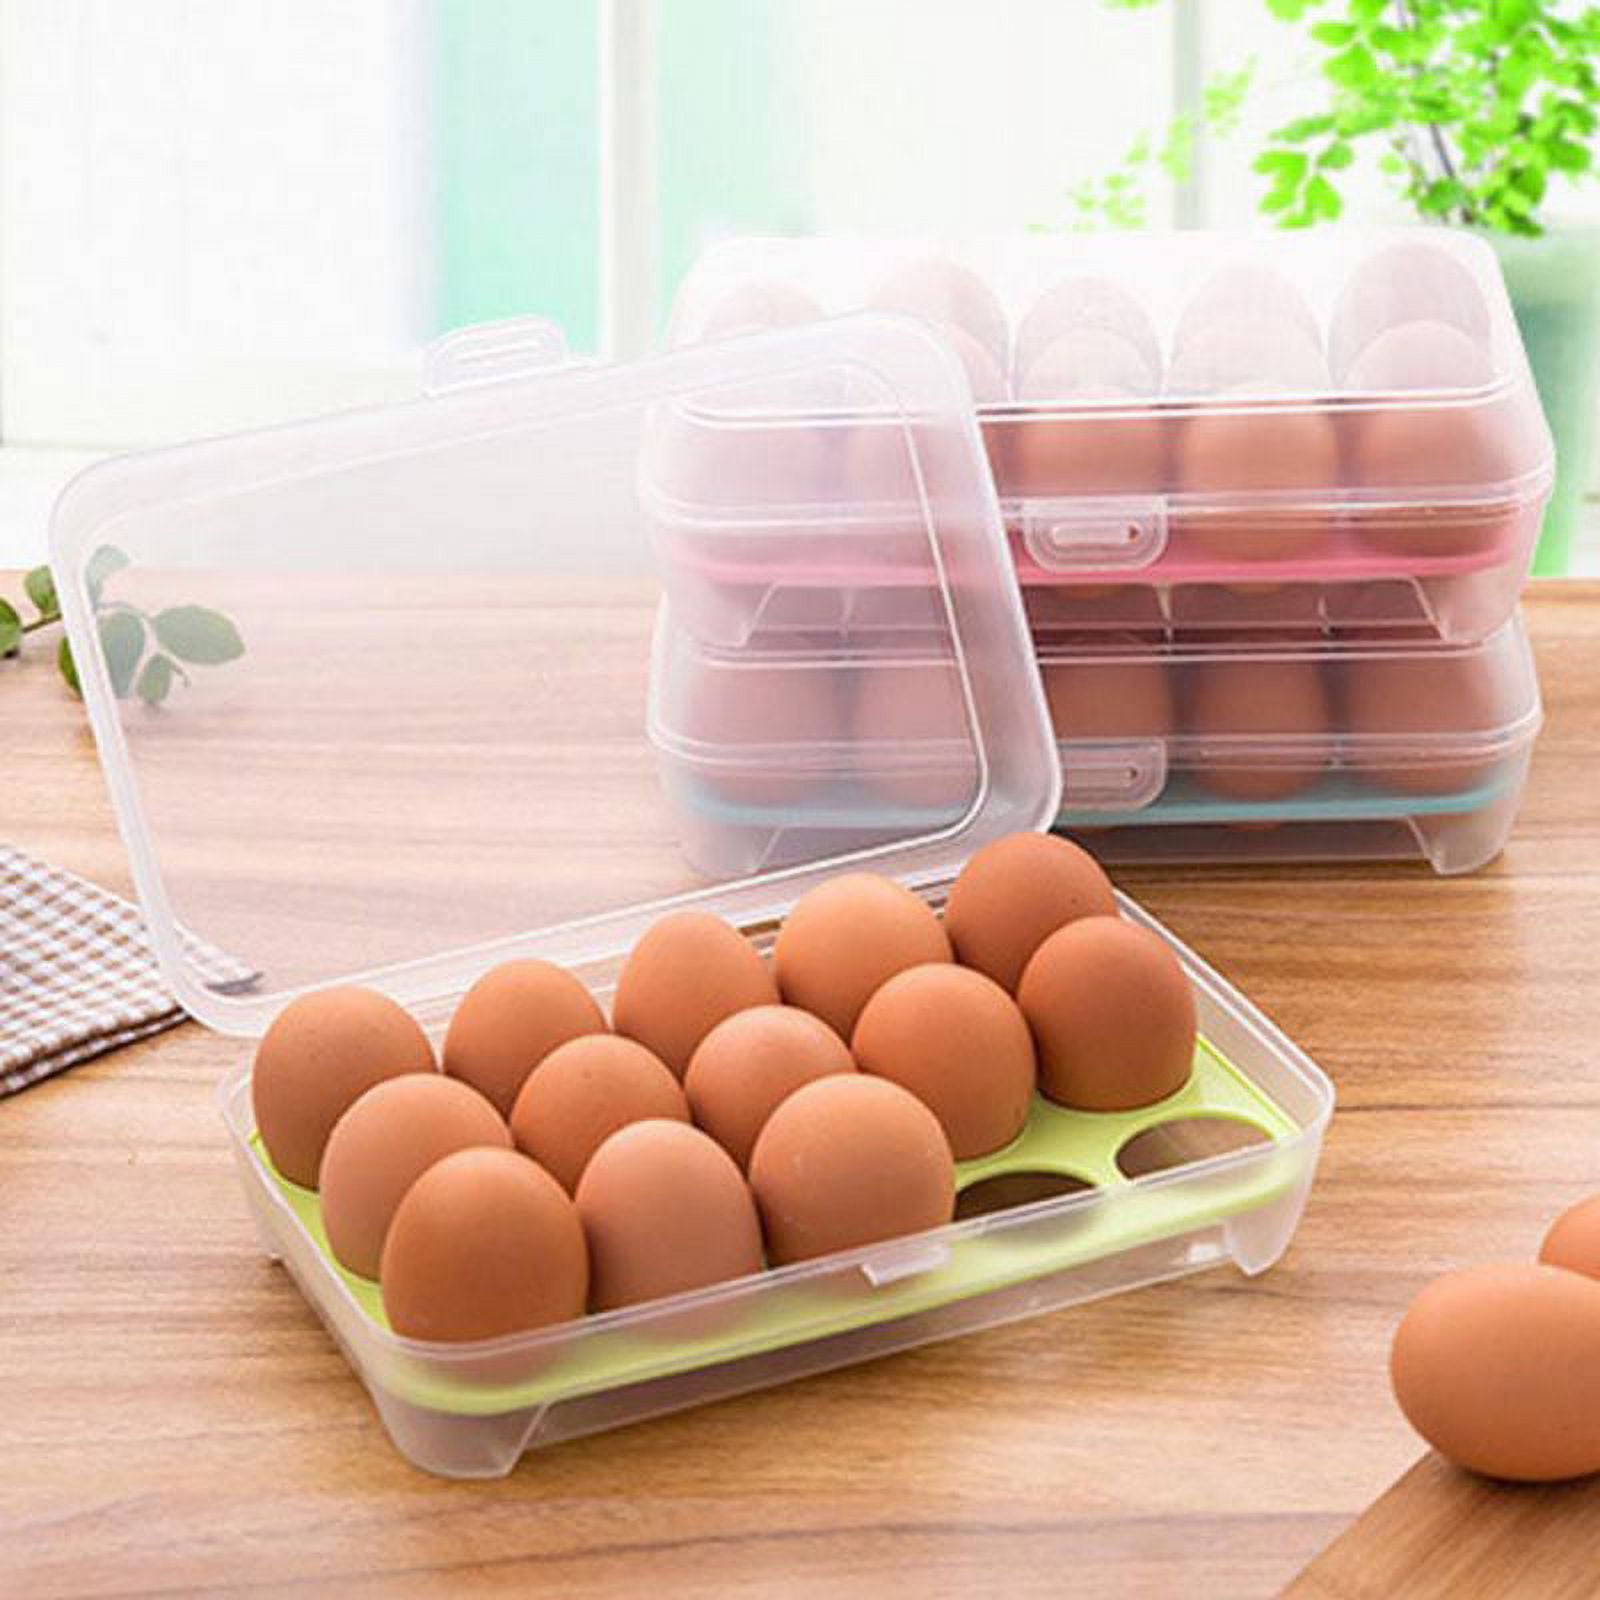  Boseen Egg Holder for Refrigerator, Deviled Egg Containers  Large Plastic Egg Tray Carrier for Fridge Kitchen Egg Storage Compact  Stackable Durable Clear with Lid Fits 48 Eggs 2 Pack : Appliances